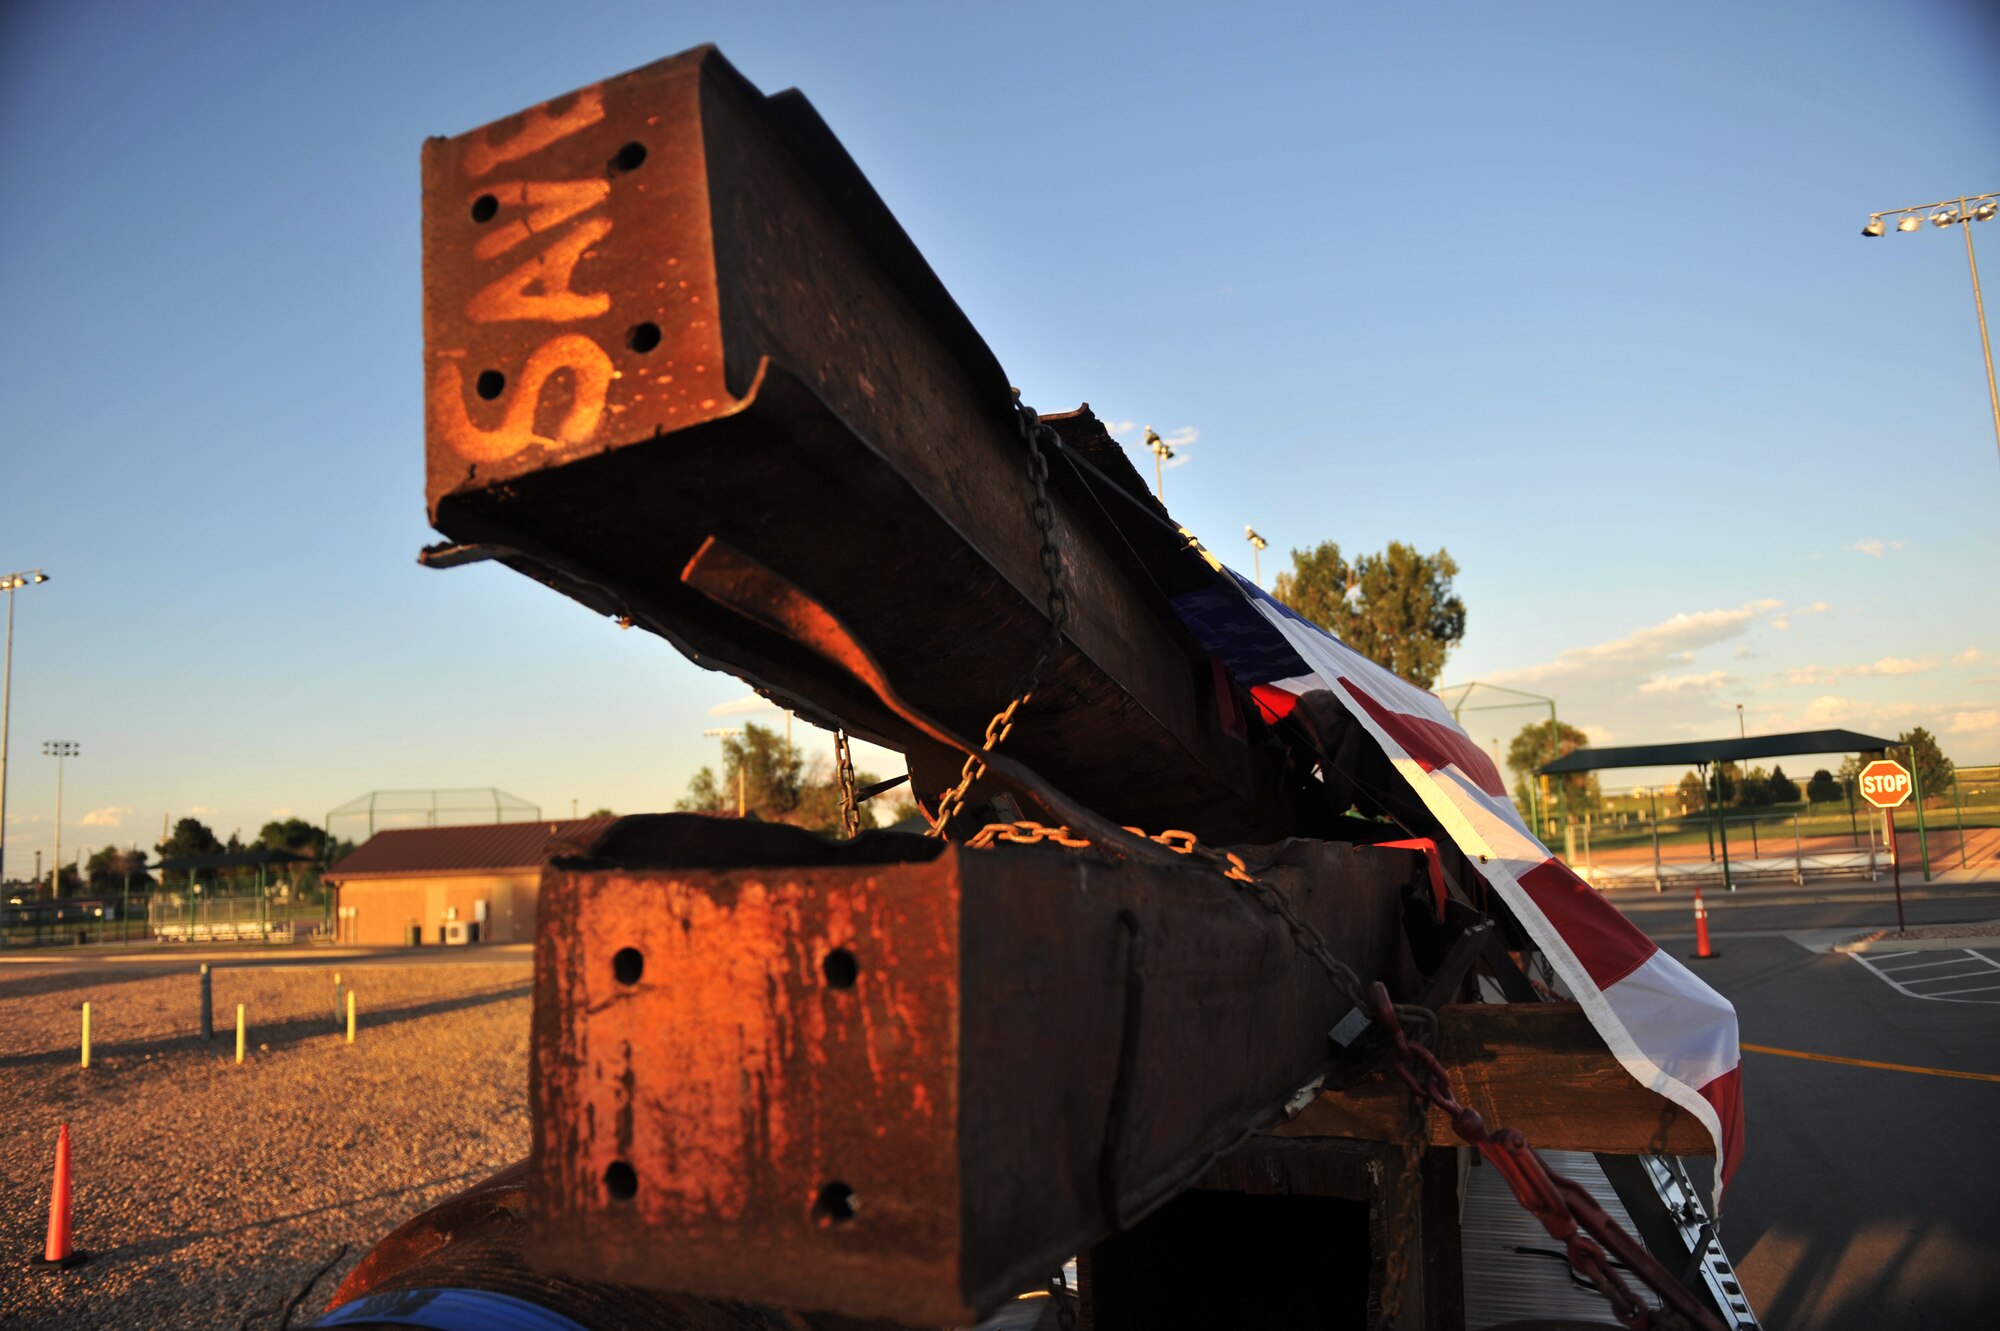 BUCKLEY AIR FORCE BASE, Colo. --Shown are more than 230,000 pounds of steel from the World Trade Center draped by an American flag here Aug. 7, 2011.  These pieces will be used in memorials commemorating the 10th anniversary of the 9/11 attacks. (U.S. Air Force Photo by Airman 1st Class Phillip Houk)